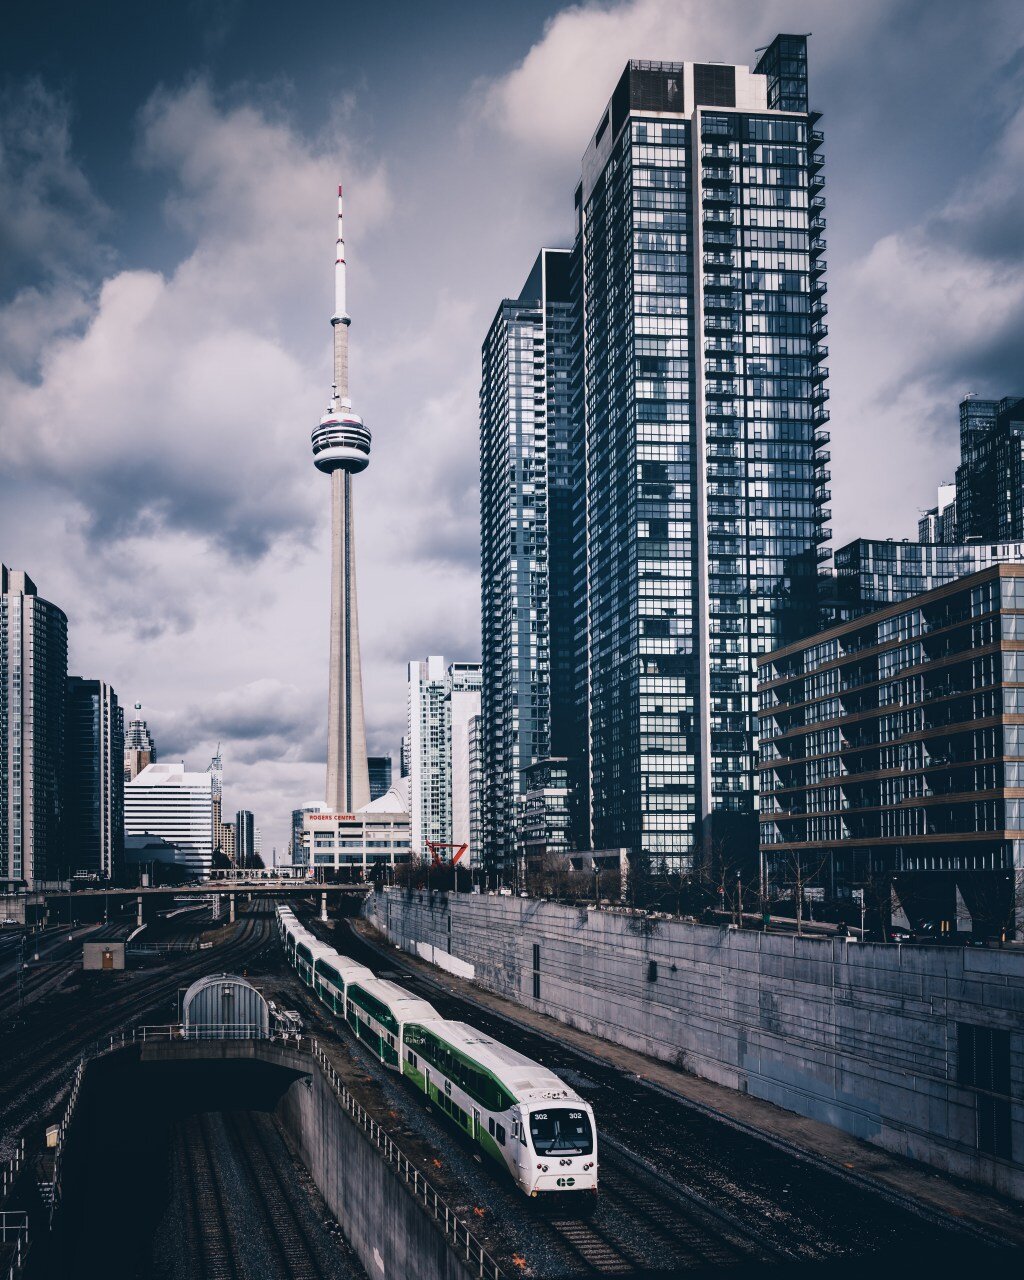 Top 10 Spots to Photograph in Toronto Framework Films